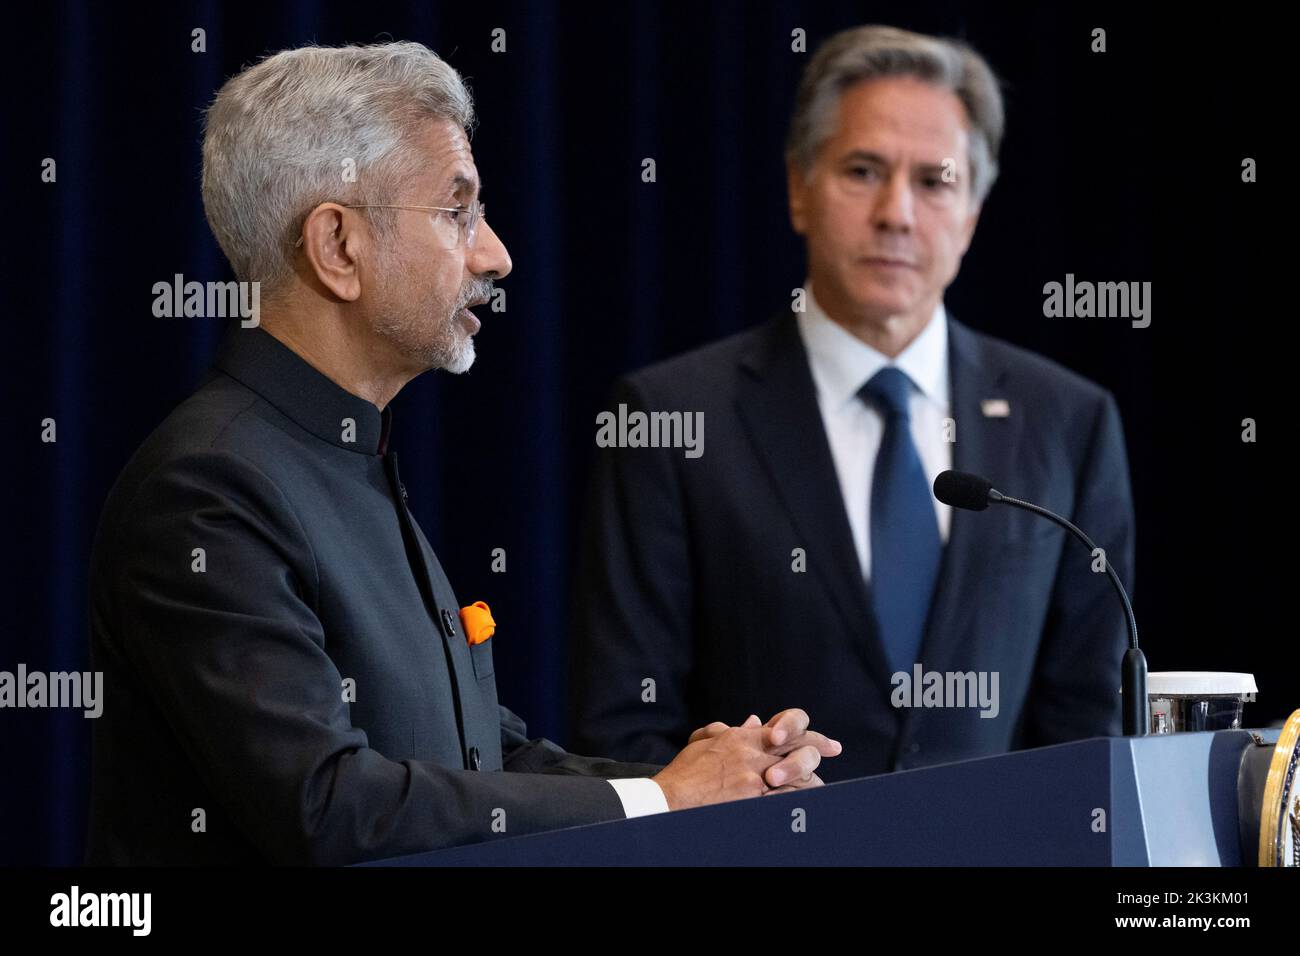 U.S. Secretary of State Antony Blinken and India's Foreign Minister Subrahmanyam Jaishankar hold a news conference at the State Department in Washington, U.S., September 27, 2022. Saul Loeb/Pool via REUTERS Stock Photo